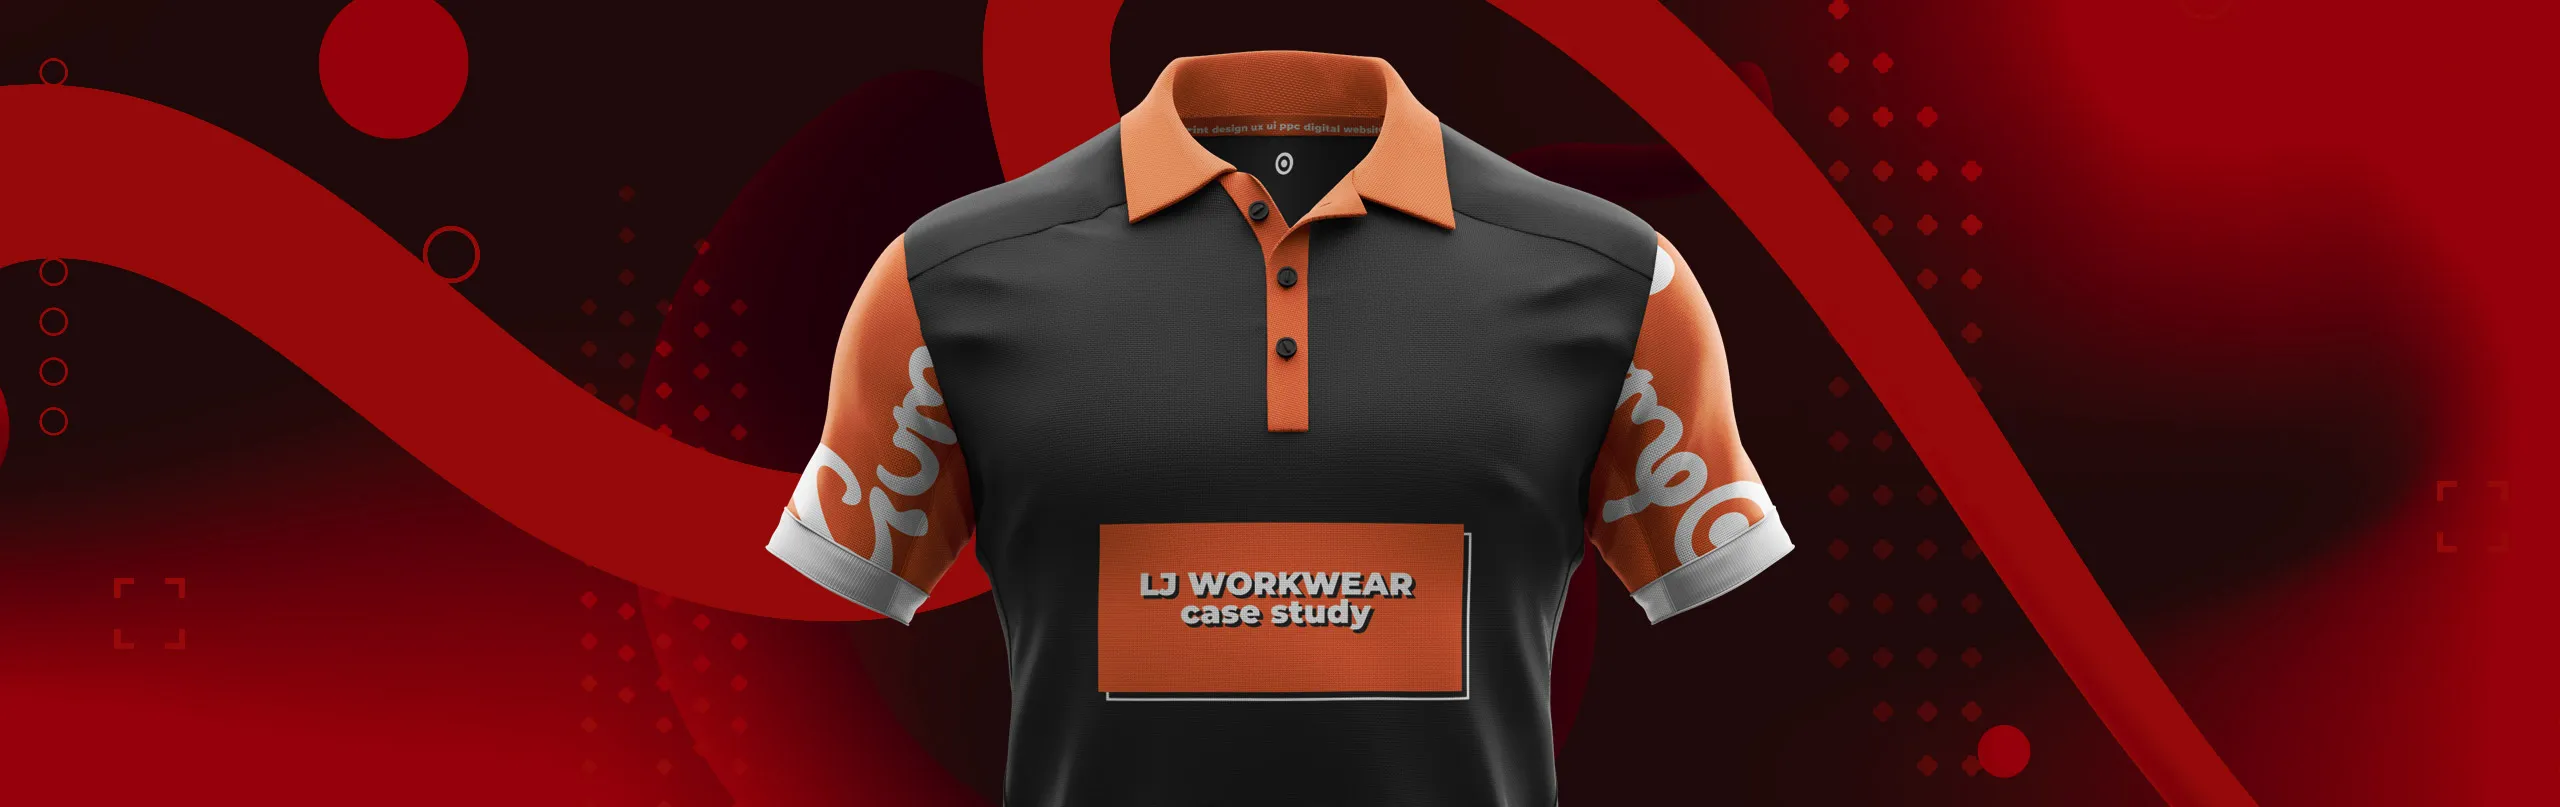 "LJ Workwear Case Study" is printed on the front of a black and orange polo shirt.